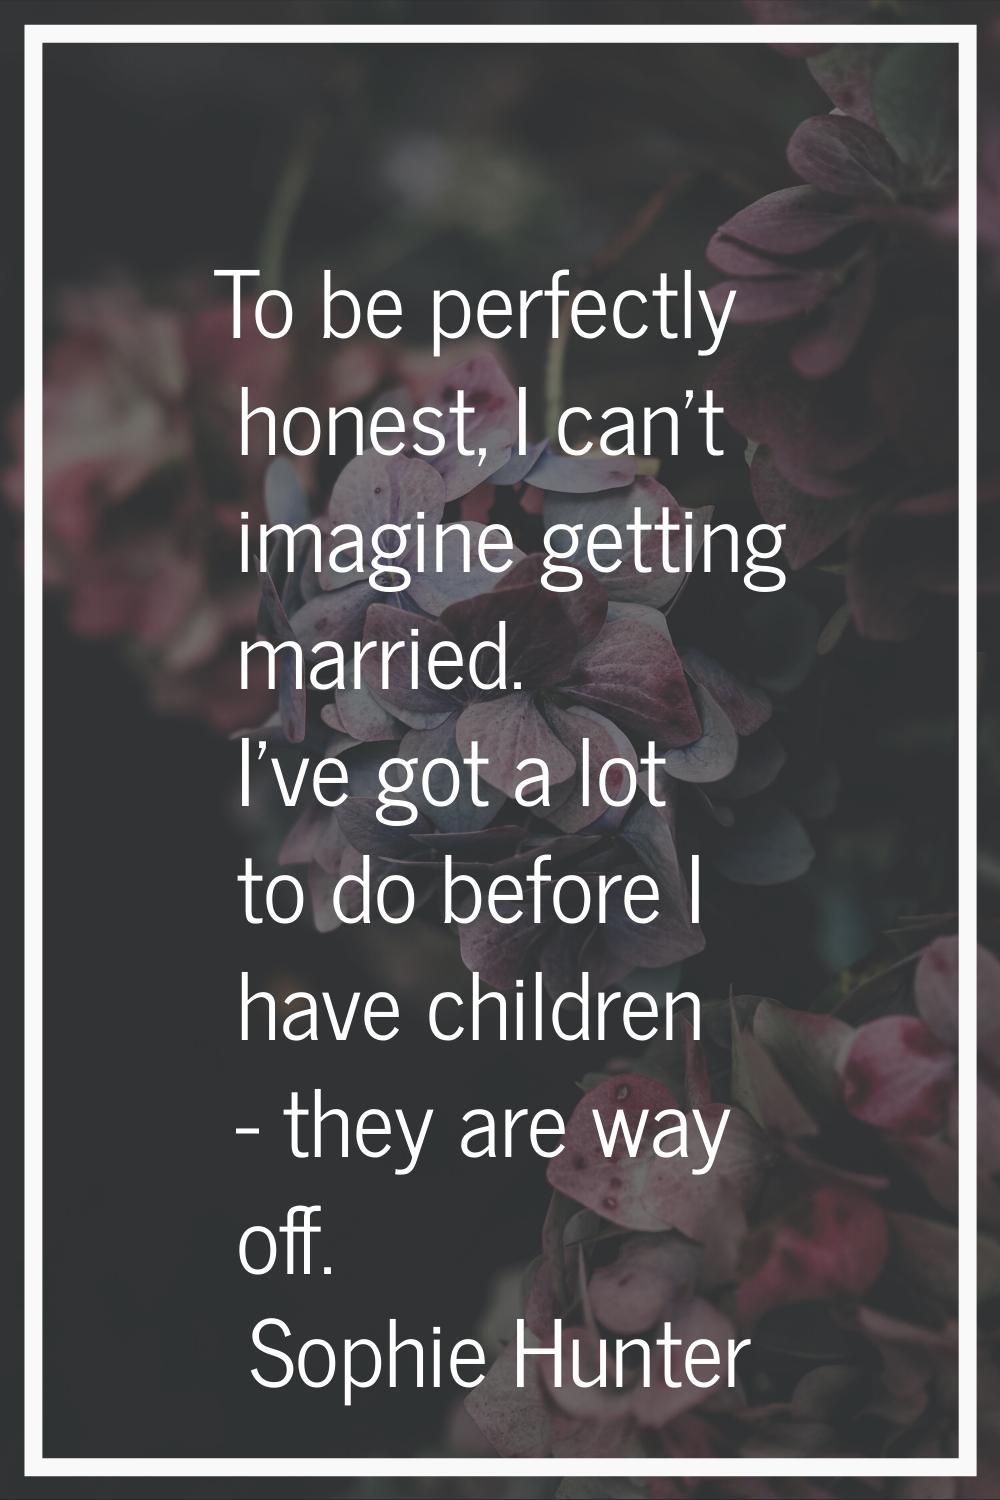 To be perfectly honest, I can't imagine getting married. I've got a lot to do before I have childre